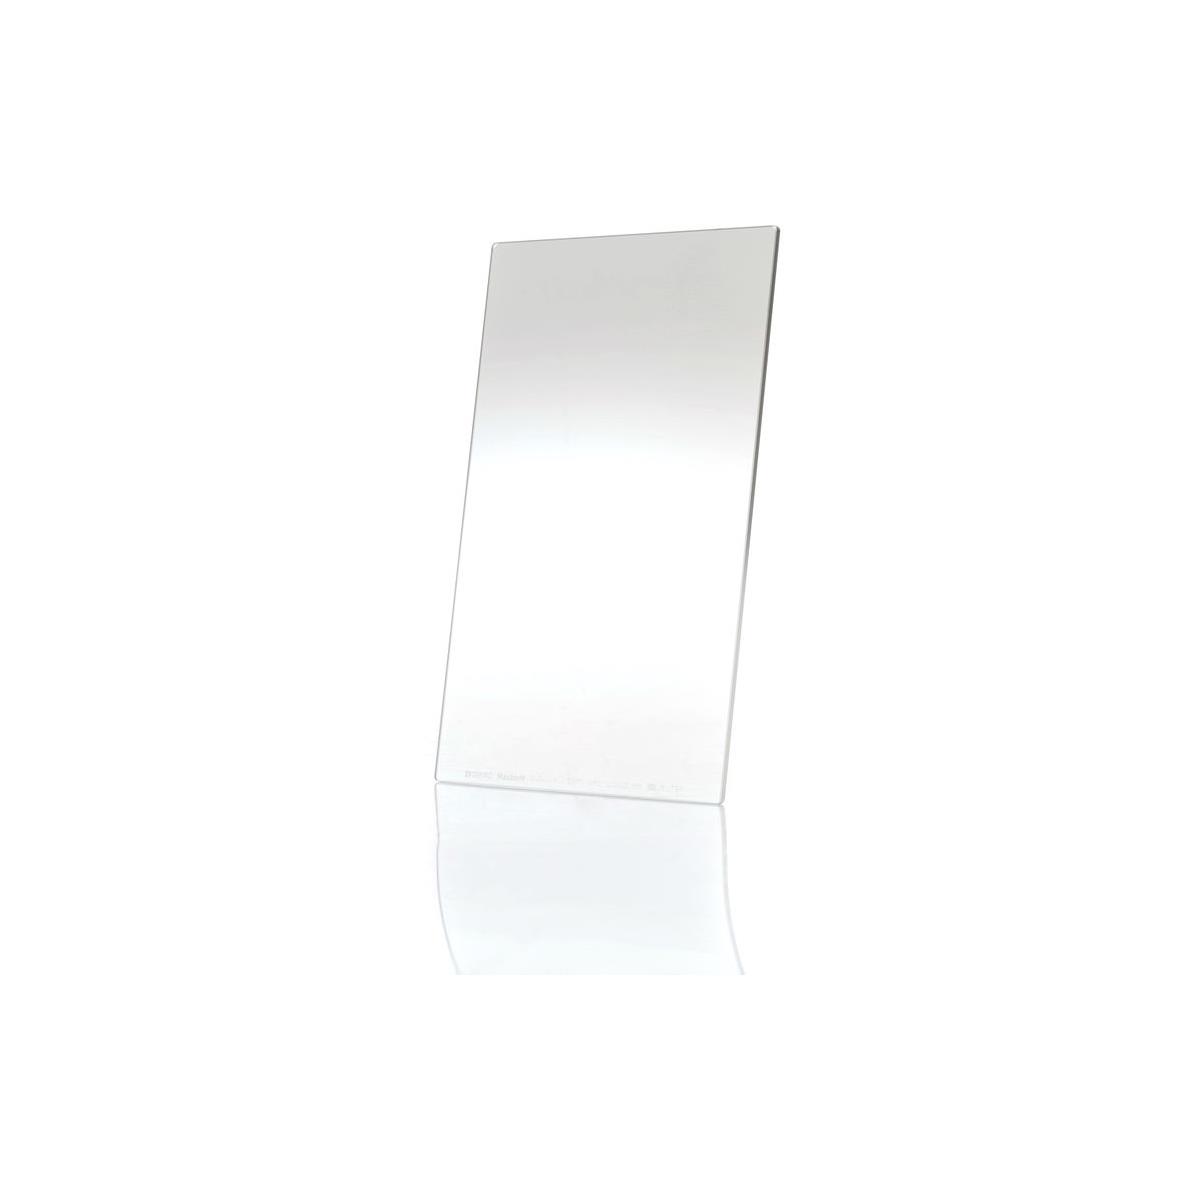 Image of Benro 100x150mm Master Hardened Glass Soft Graduated 0.6 ND Filter